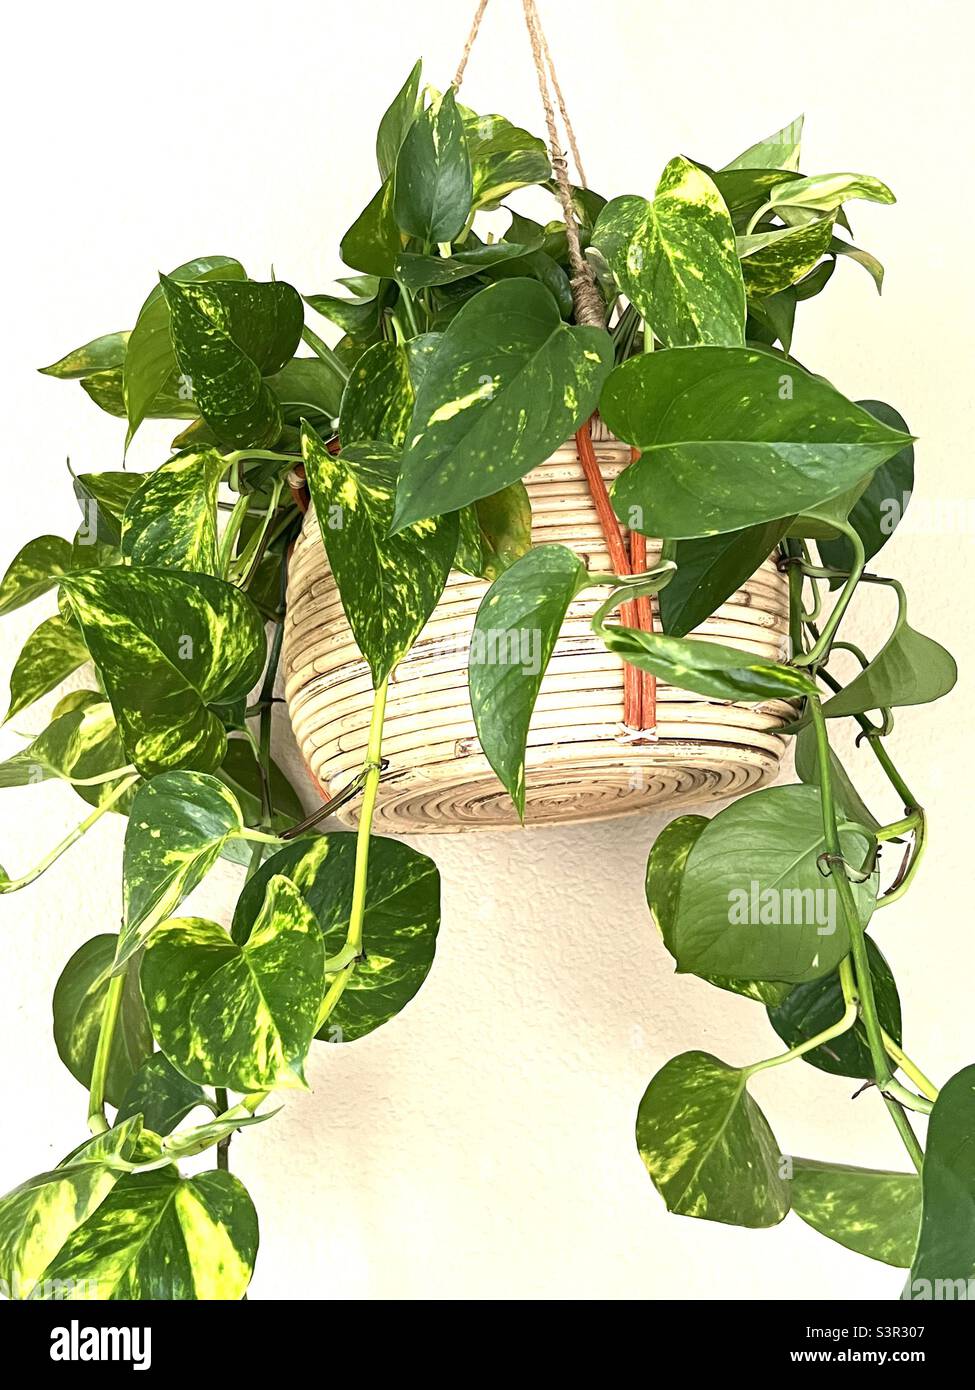 Indoor hanging plants with green leaves Stock Photo